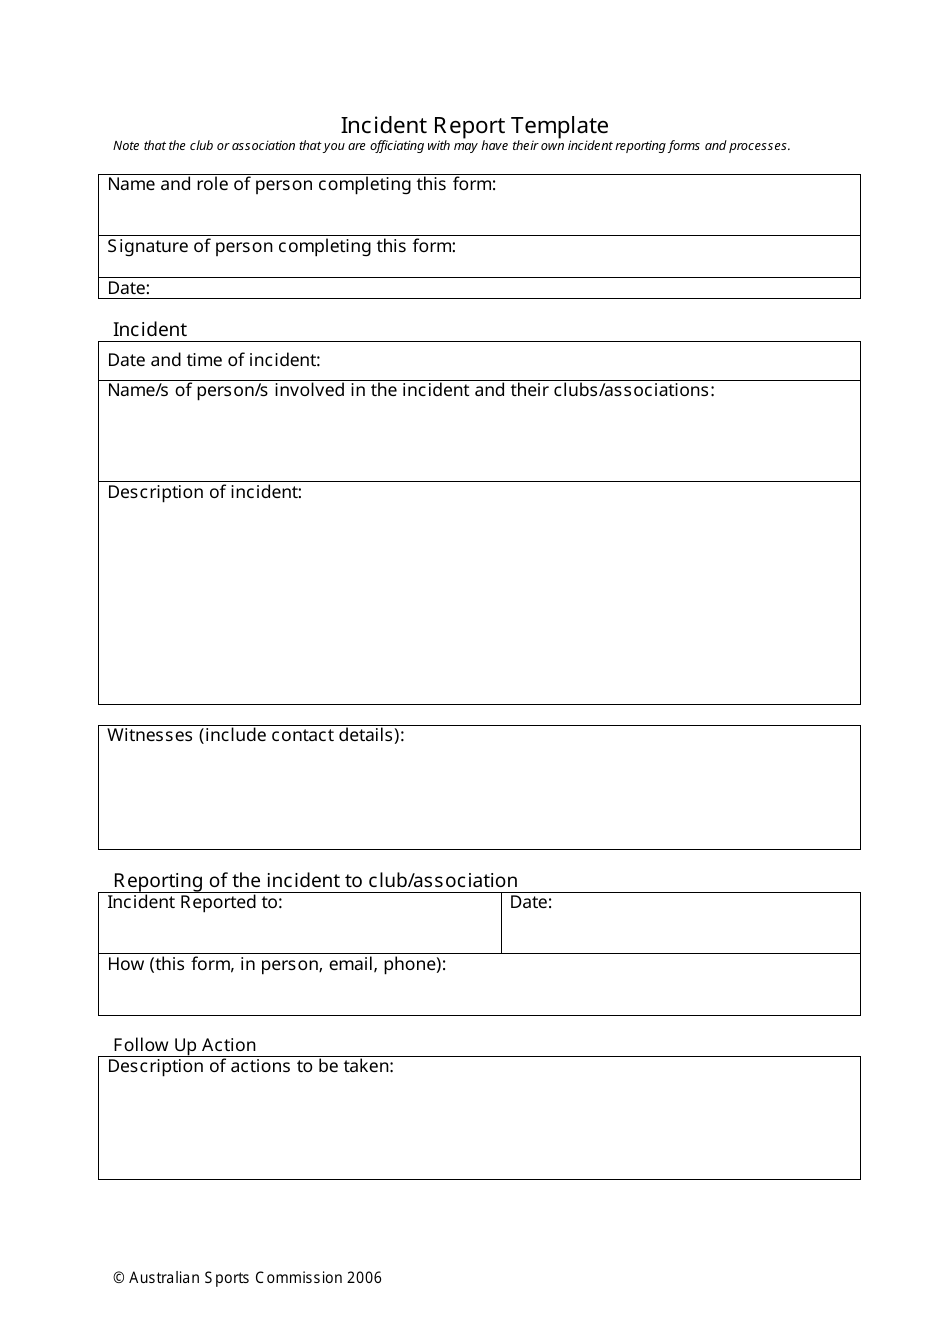 Incident Report Template - Australian Sports Commission, Page 1